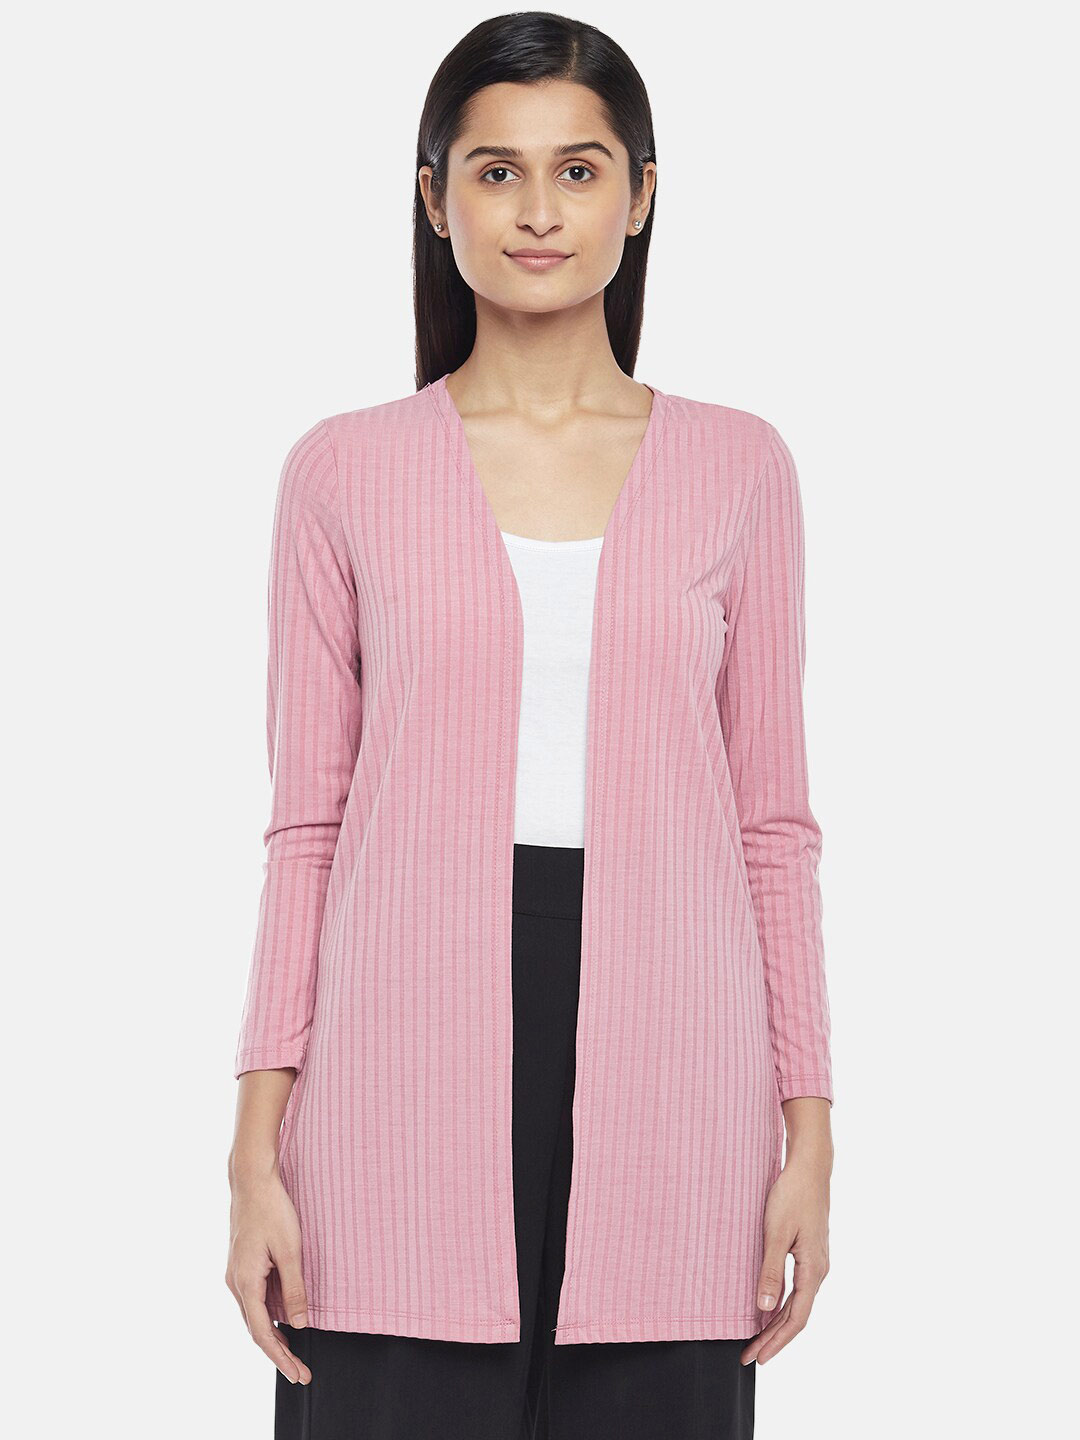 Honey by Pantaloons Women Pink Striped Longline Shrug Price in India